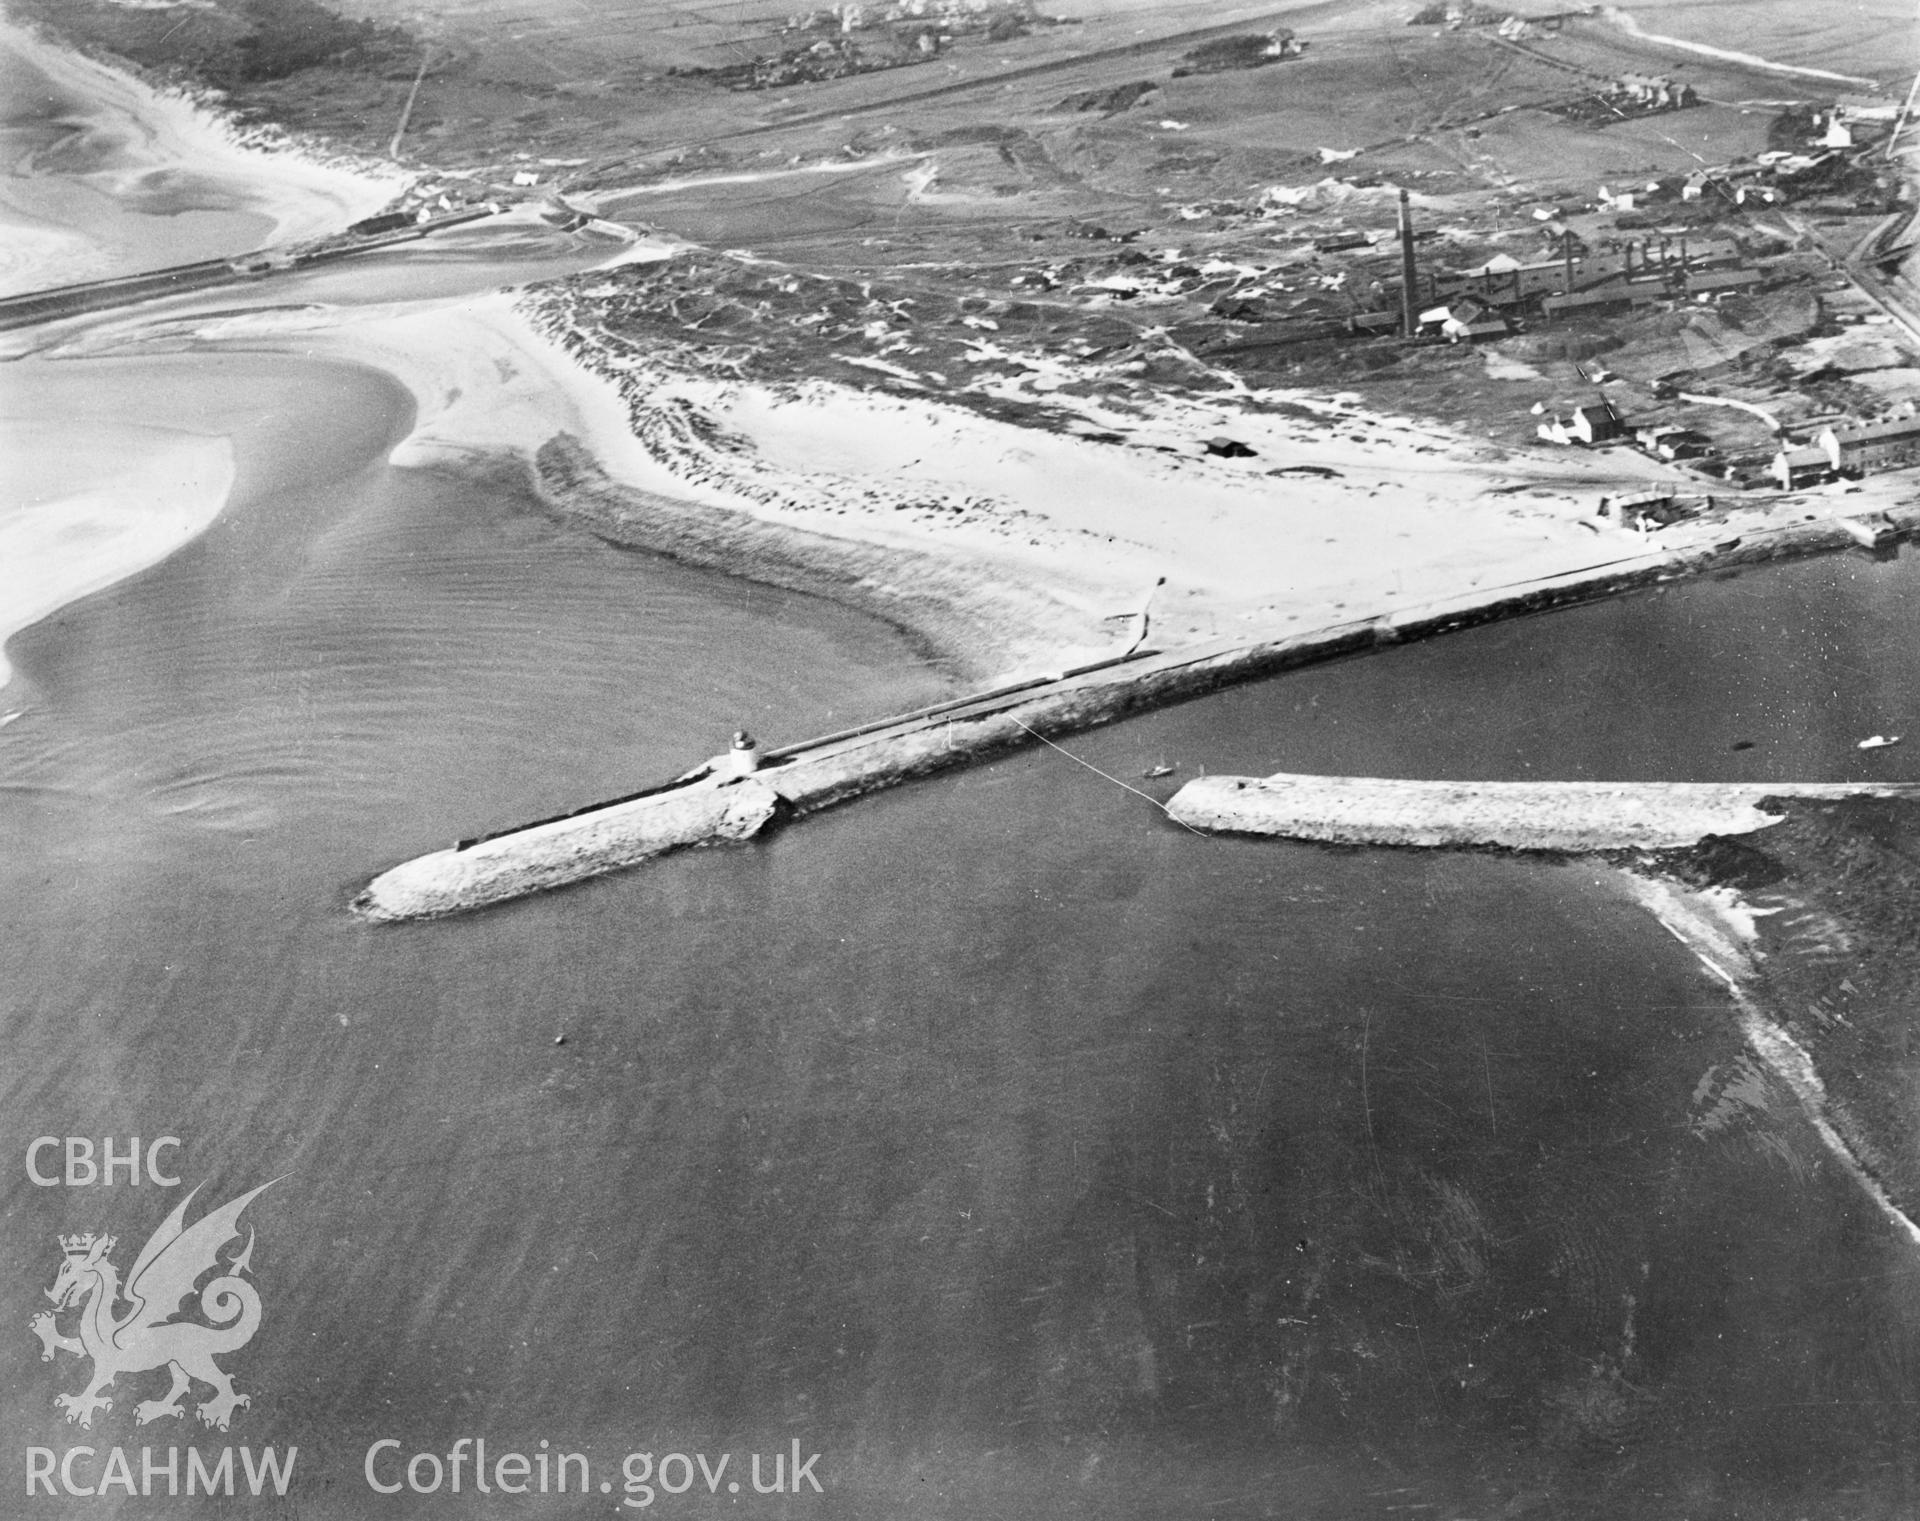 View of Burry Port pier and lighthouse with Ashburnham Tinplate Works. Oblique aerial photograph, 5?x4? BW glass plate.